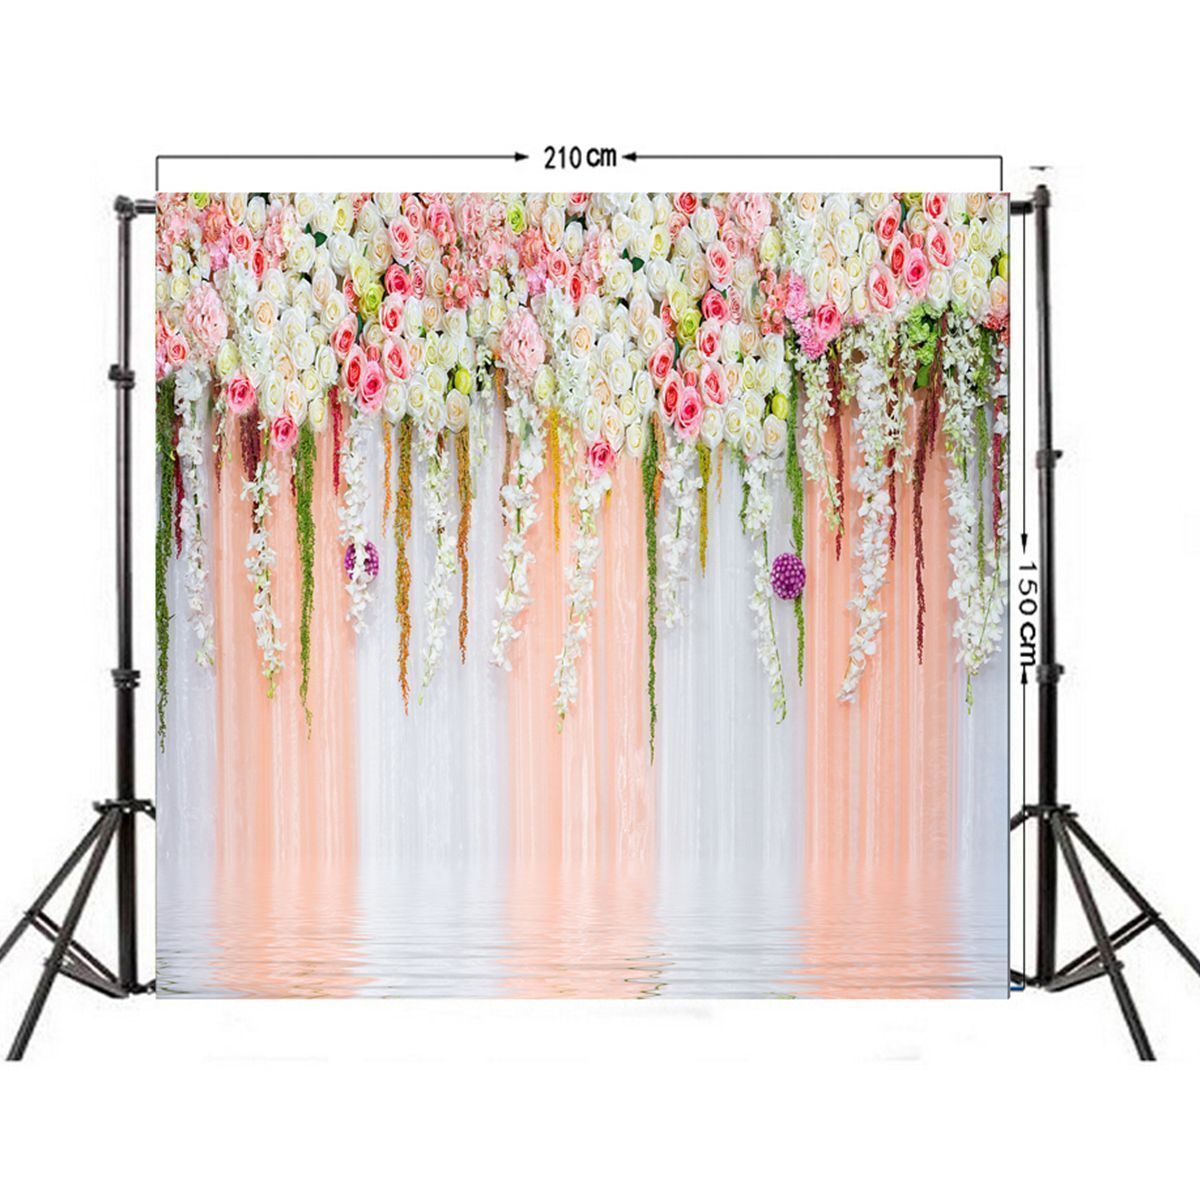 7x5FT-Wedding-Romantic-Flower-Wall-Backdrop-Photography-Prop-Photo-Background-1697003